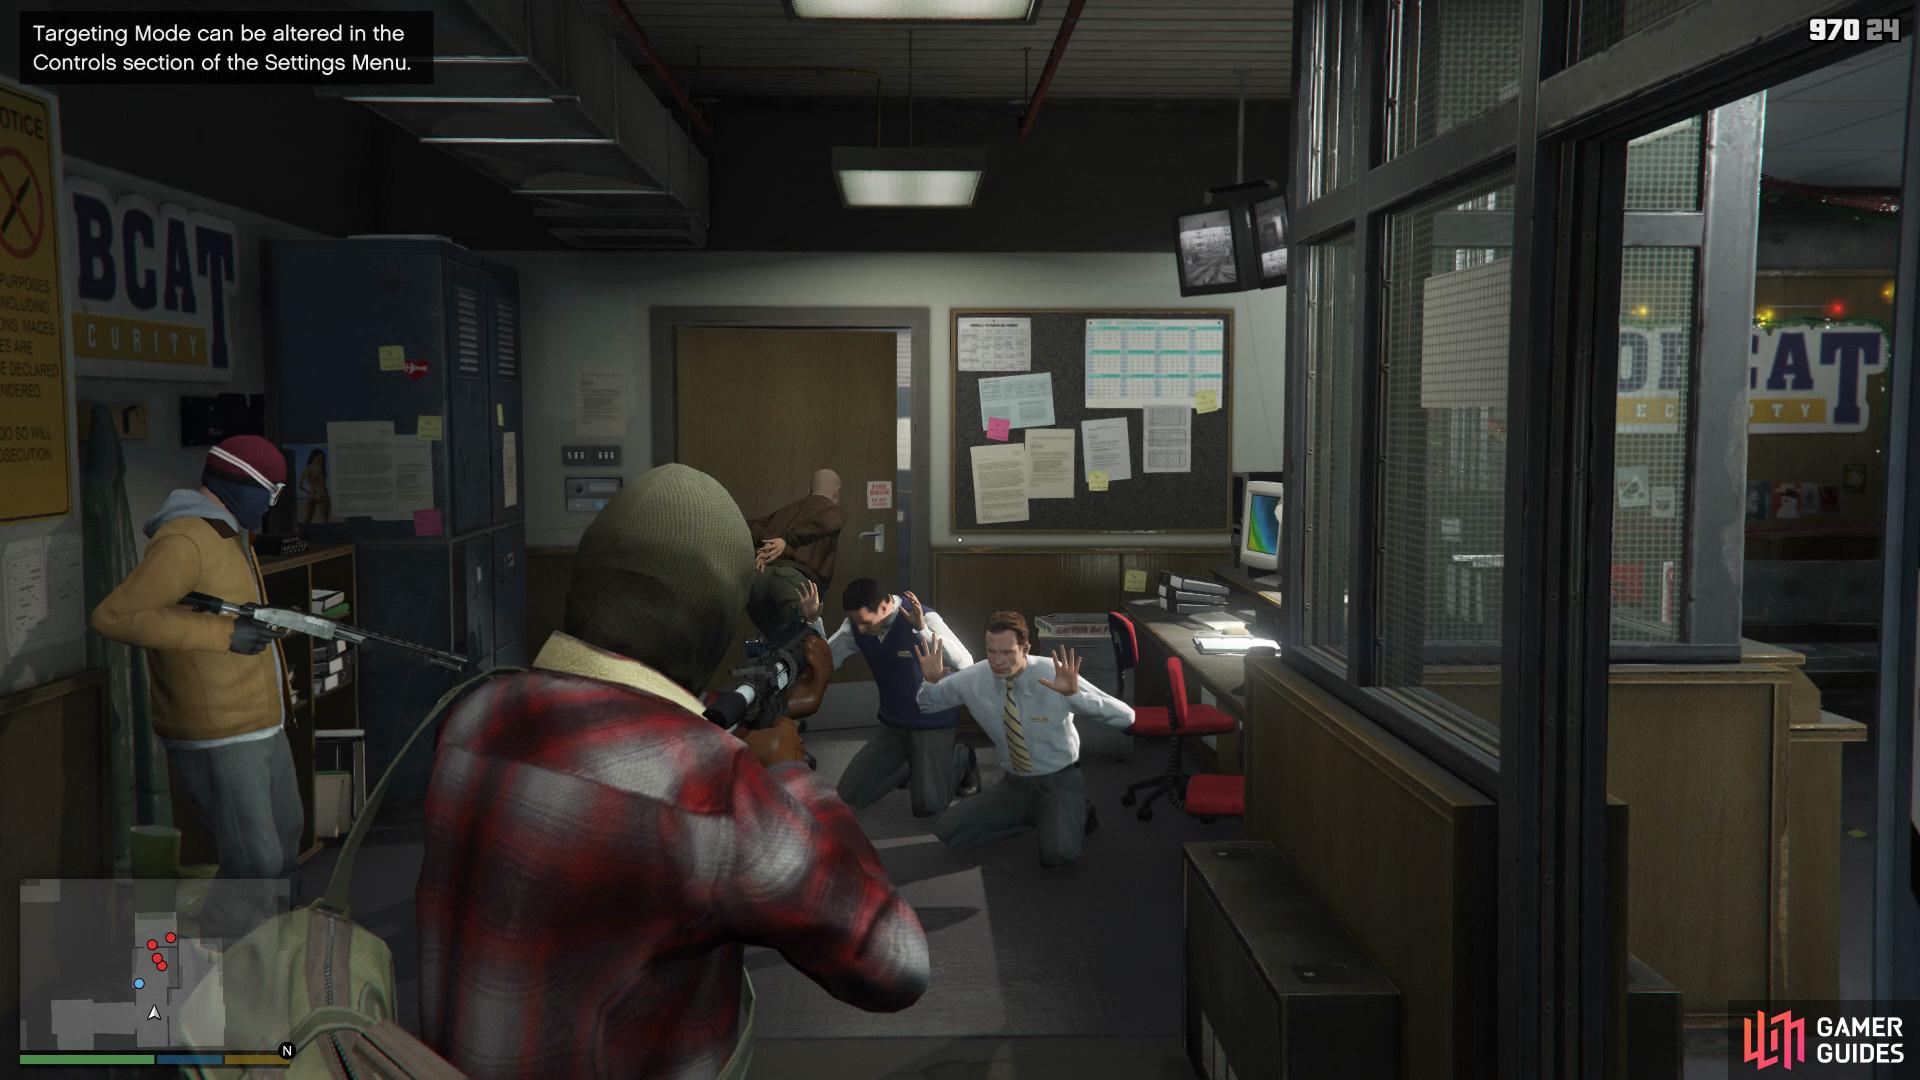 Videogaming: Newbies Guide to Grand Theft Auto Online